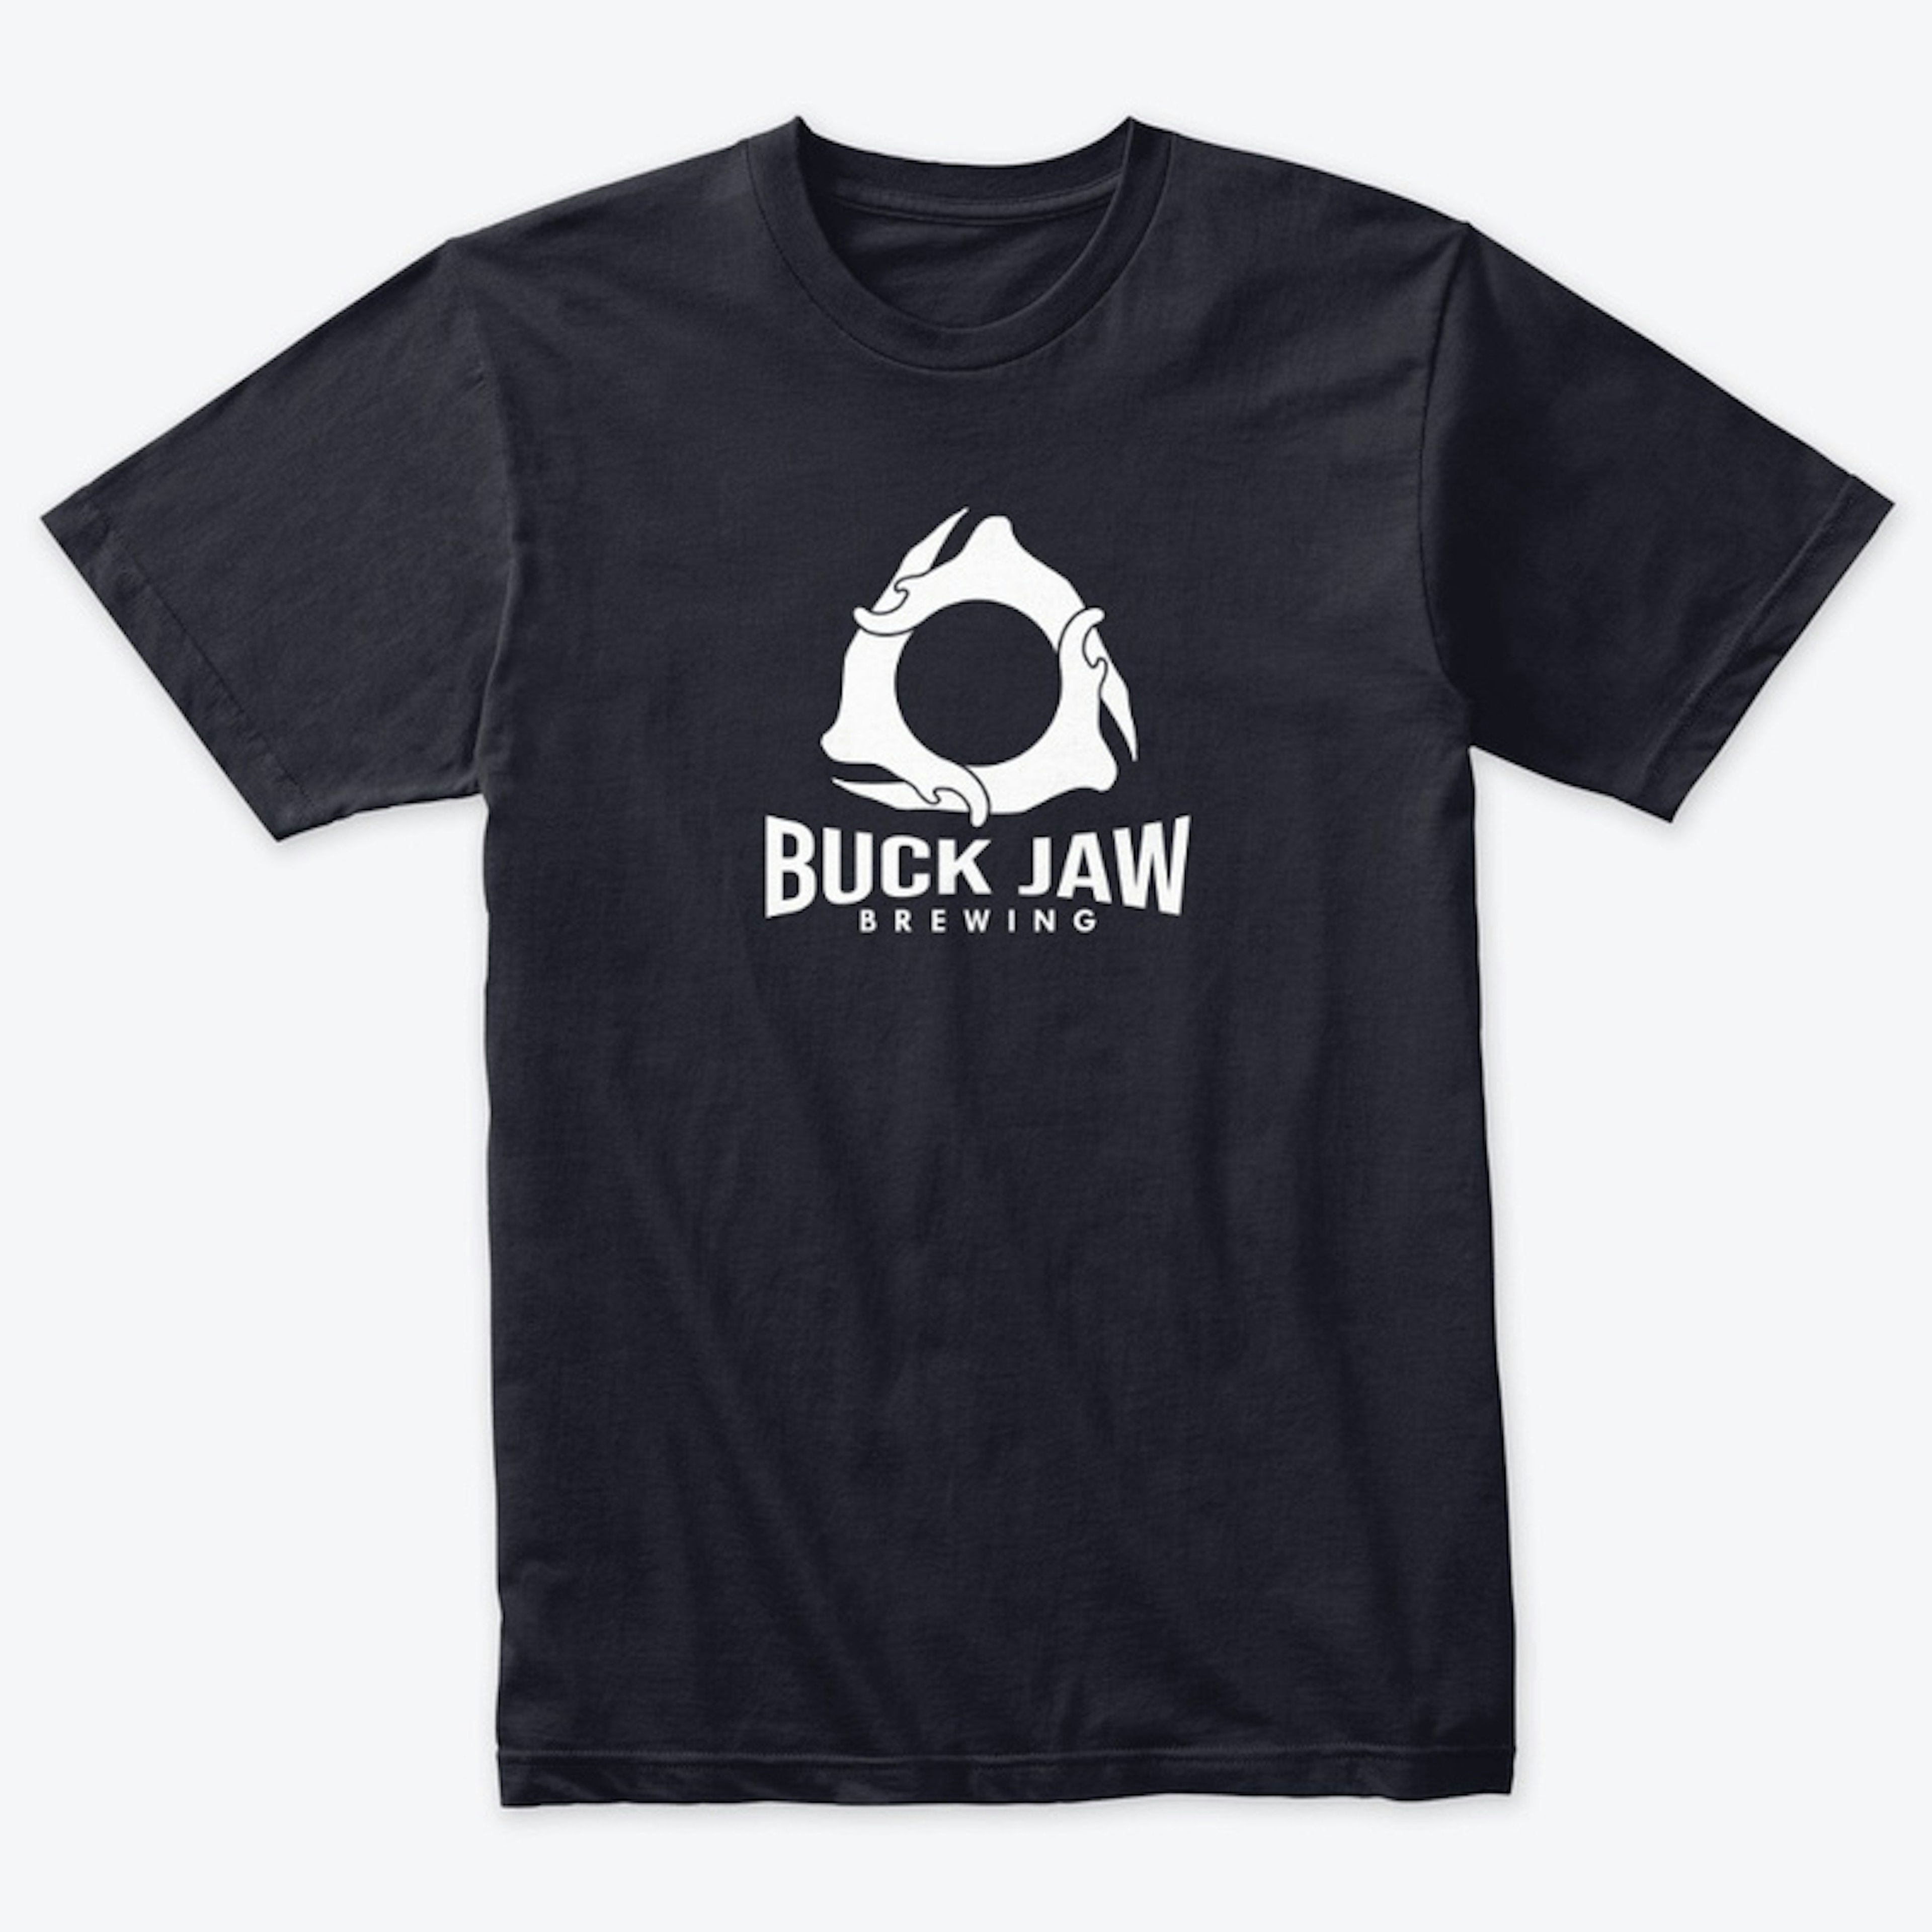 Buck Jaw - What are you waiting for?